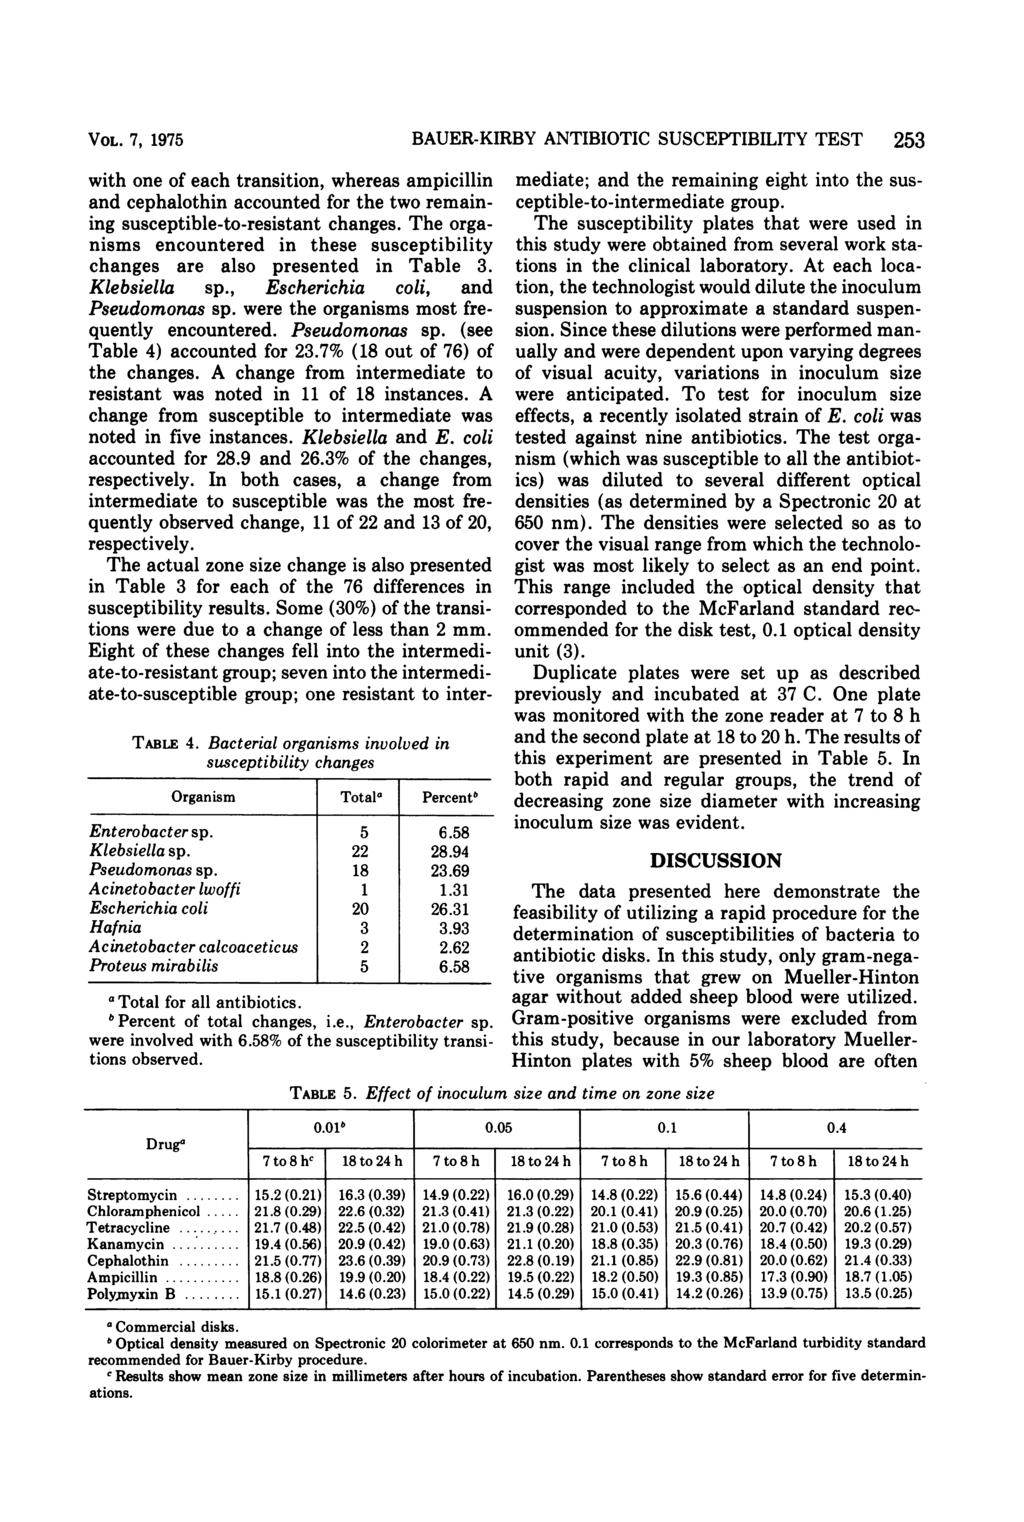 VOL. 7, 1975 with one of each transition, whereas ampicillin and cephalothin accounted for the two remaining susceptible-to-resistant changes.